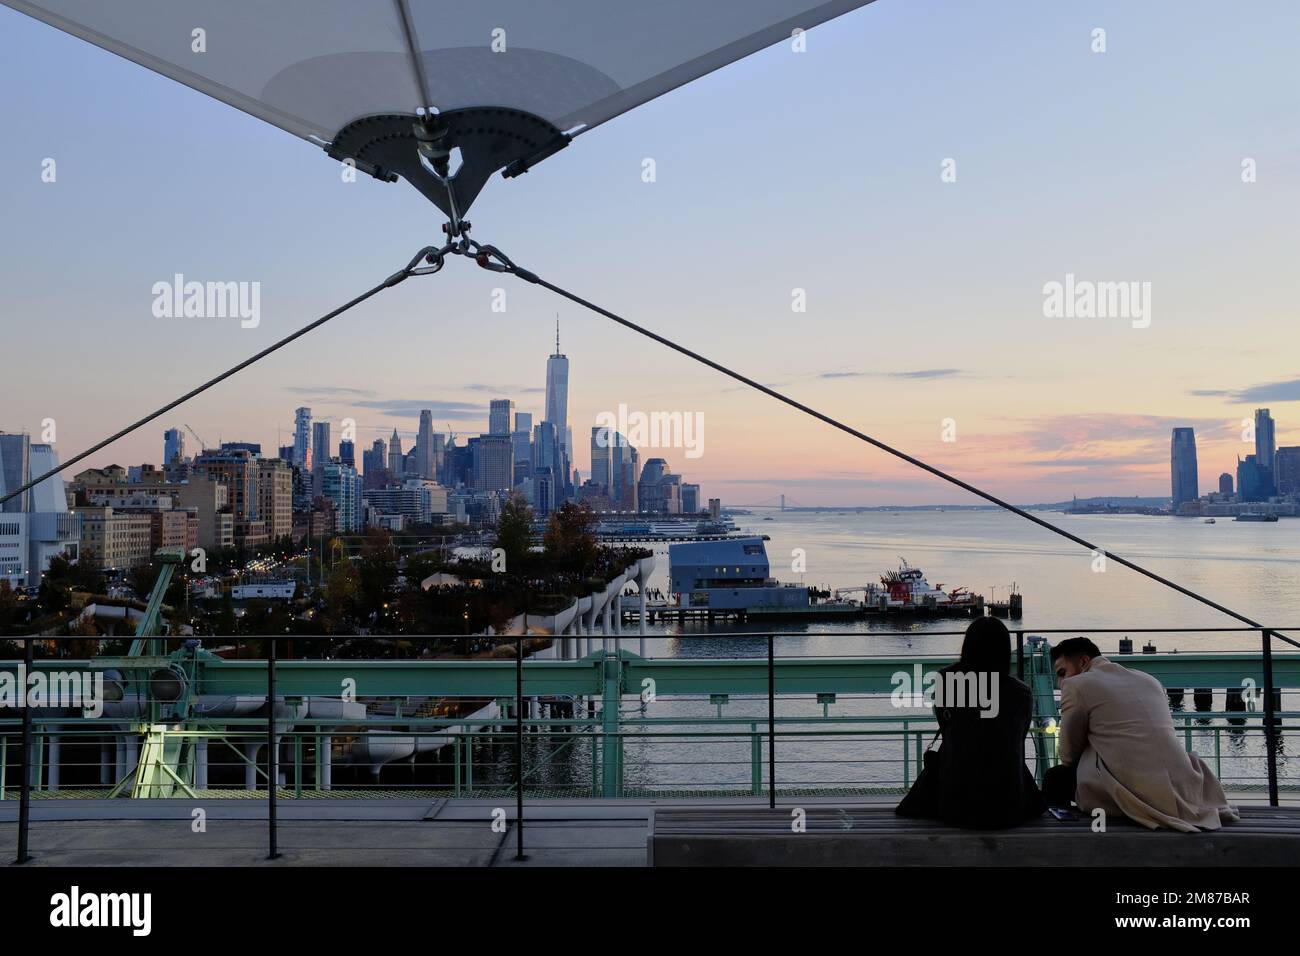 The view of Hudson River and Lower Manhattan skyline with Jersey City in distance from Pier 57 Rooftop Park with visitors.Manhattan.New York City.USA Stock Photo